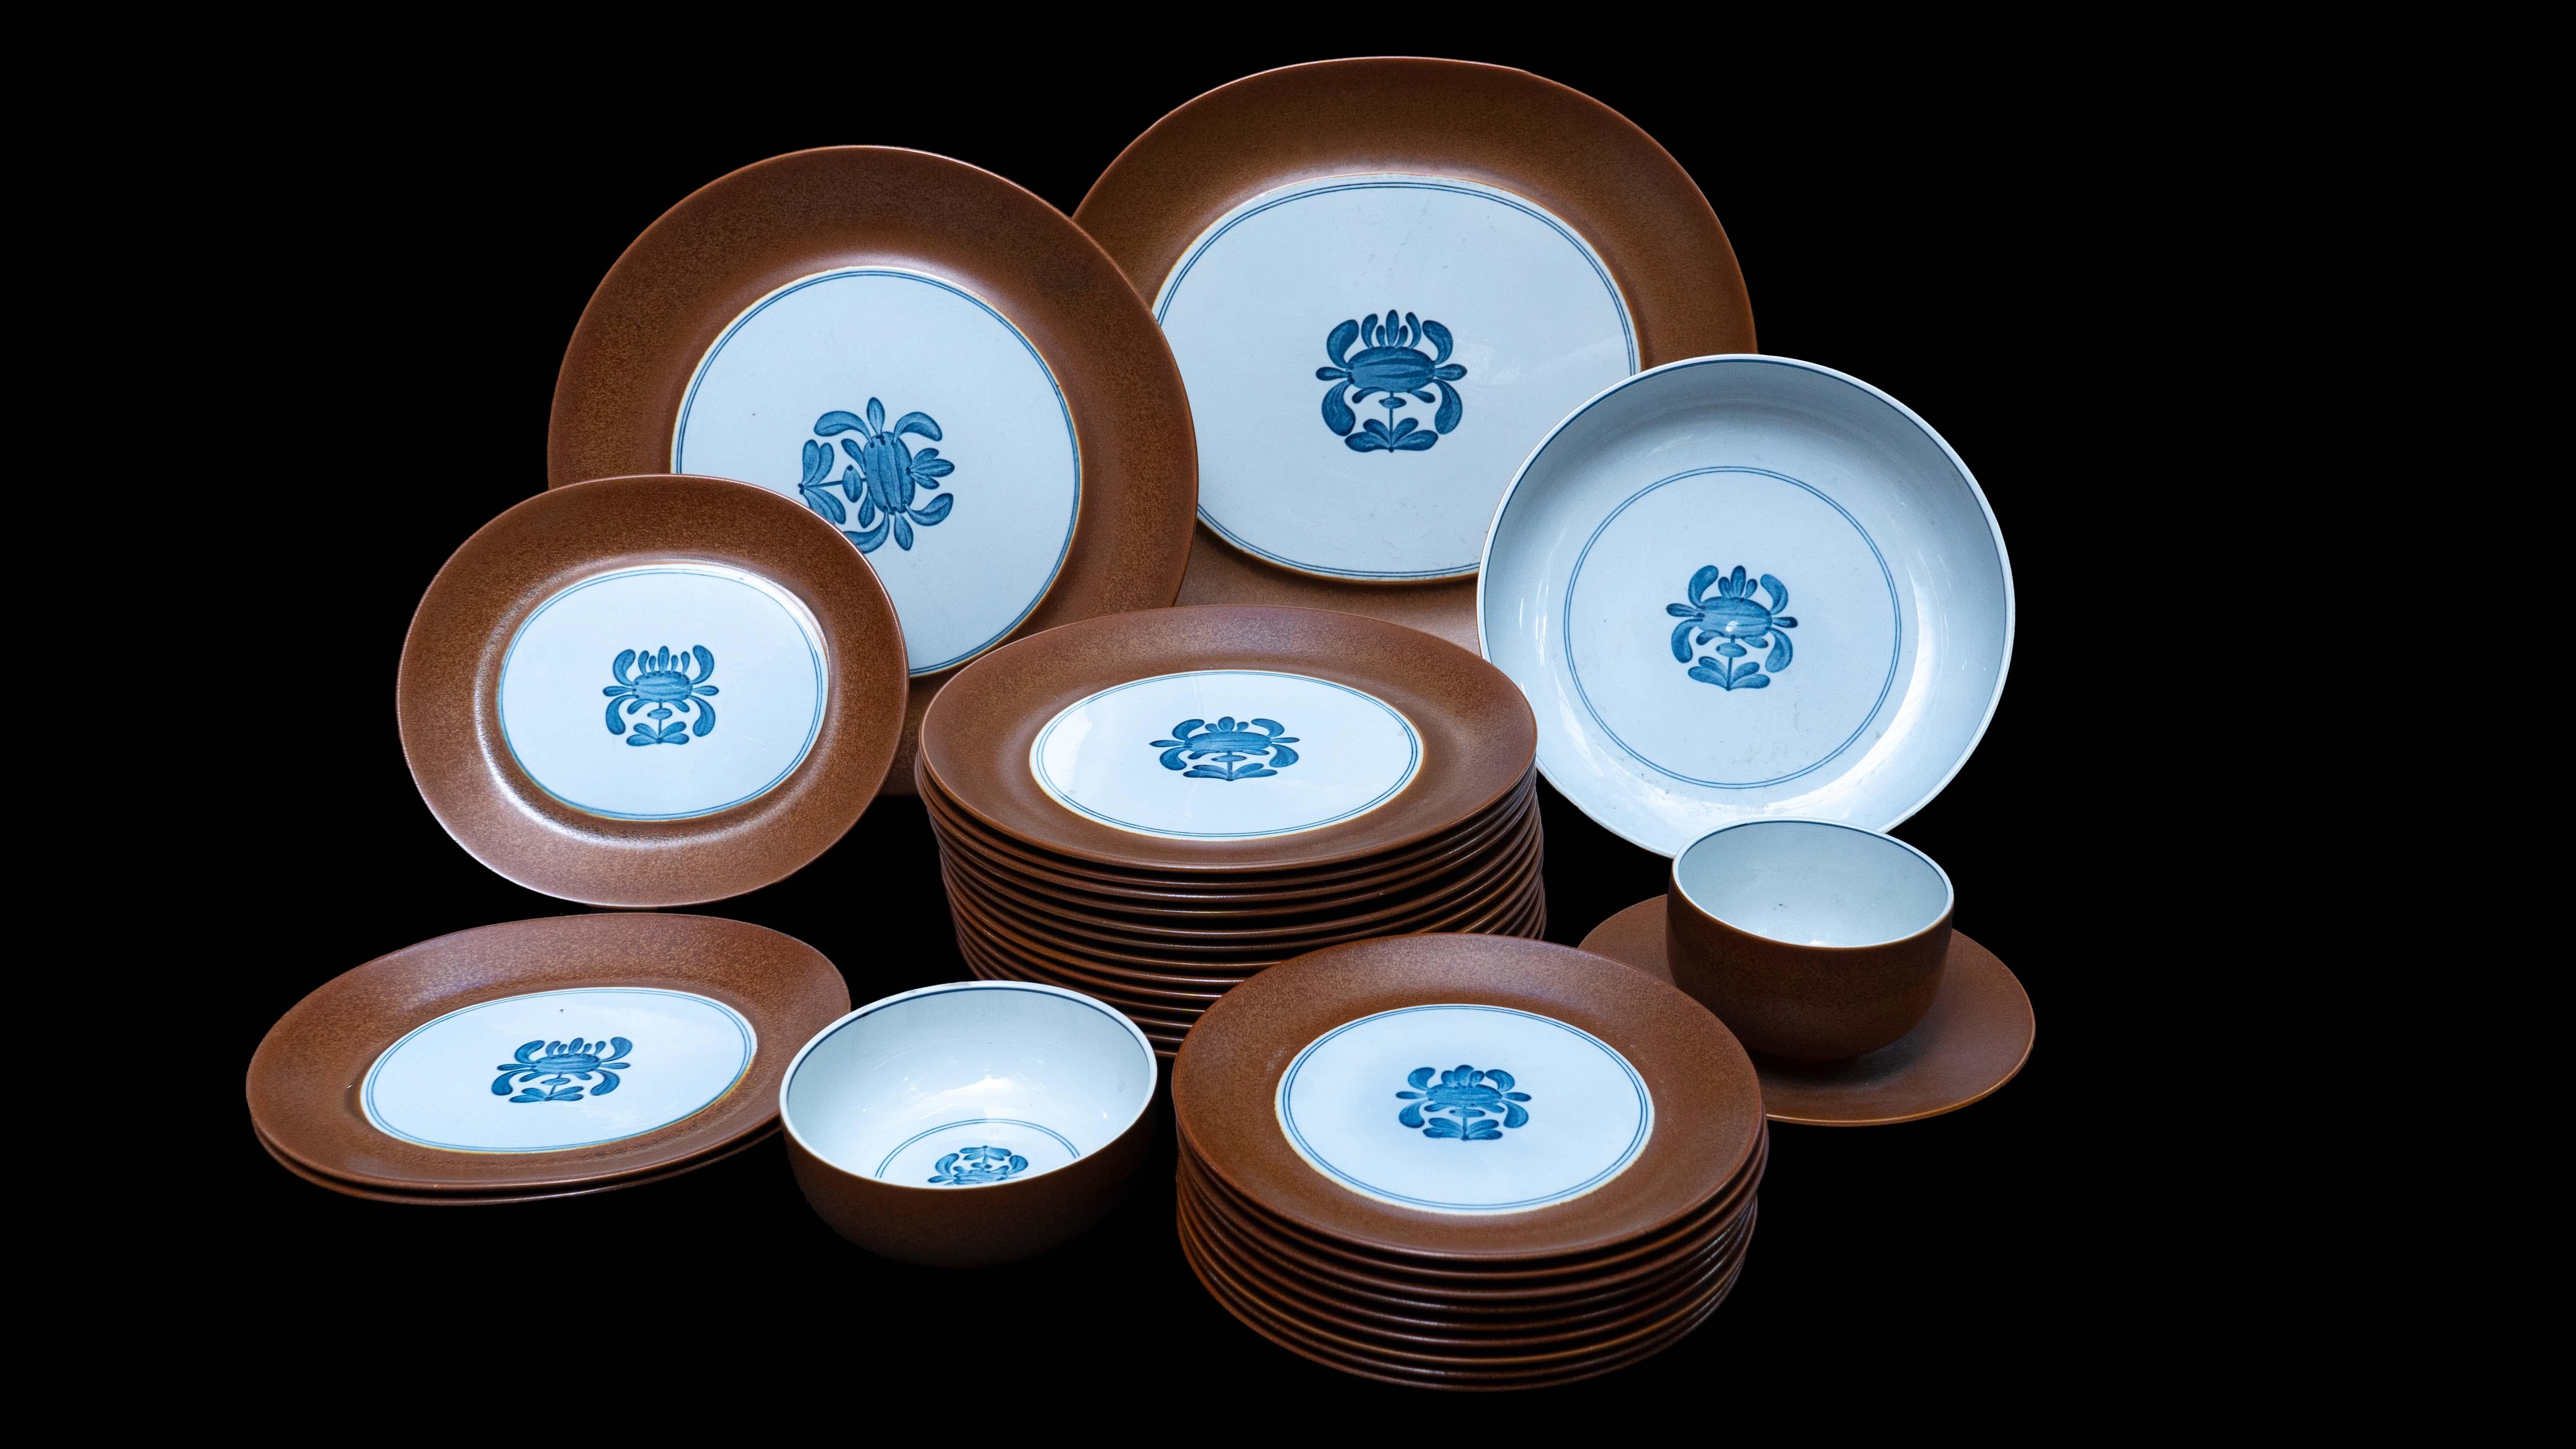 Vintage Villeroye & Boch Plates and Serving set. Production of this pattern started in 1982 and was discontinued in 1995. The Chekiang pattern is brown and white with blue asian style rotogravure decoration. These porcelain pieces were produced in